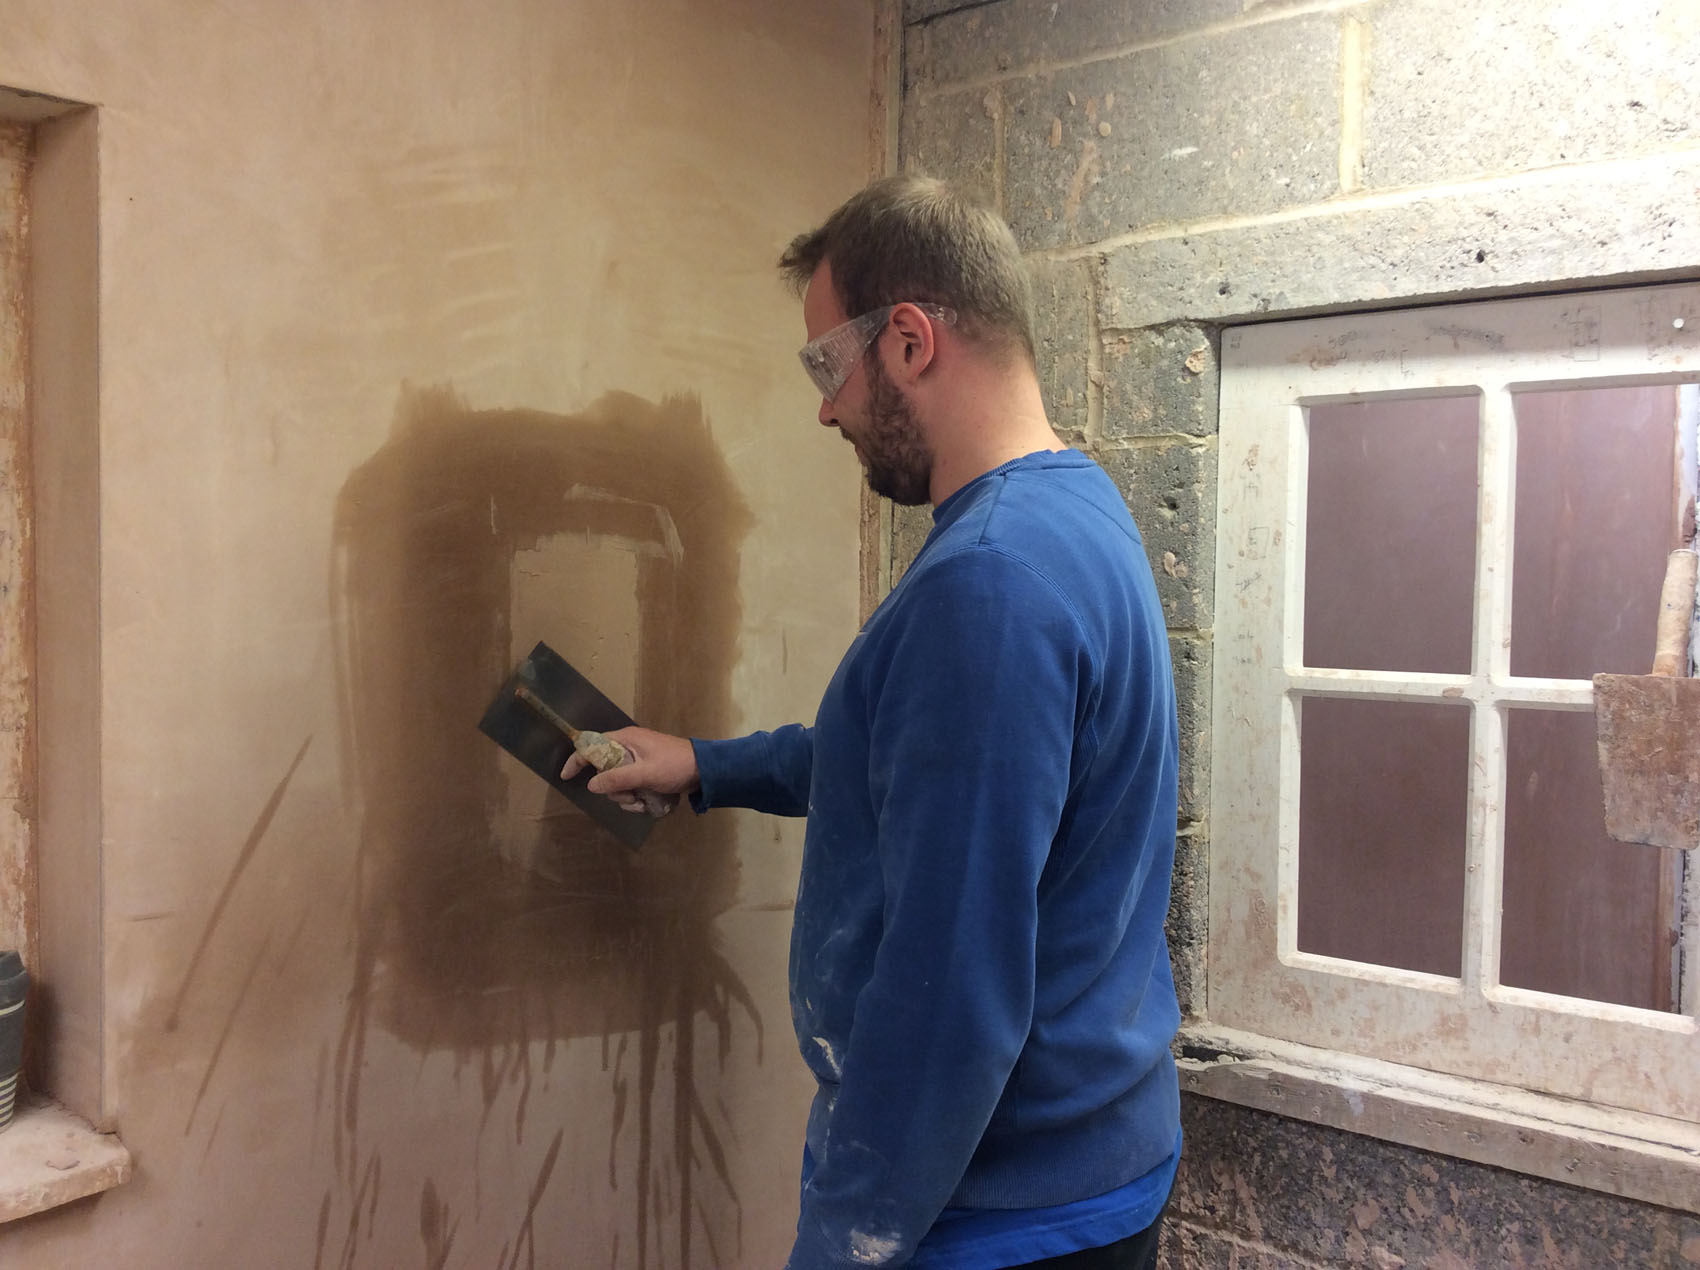 Plastering courses